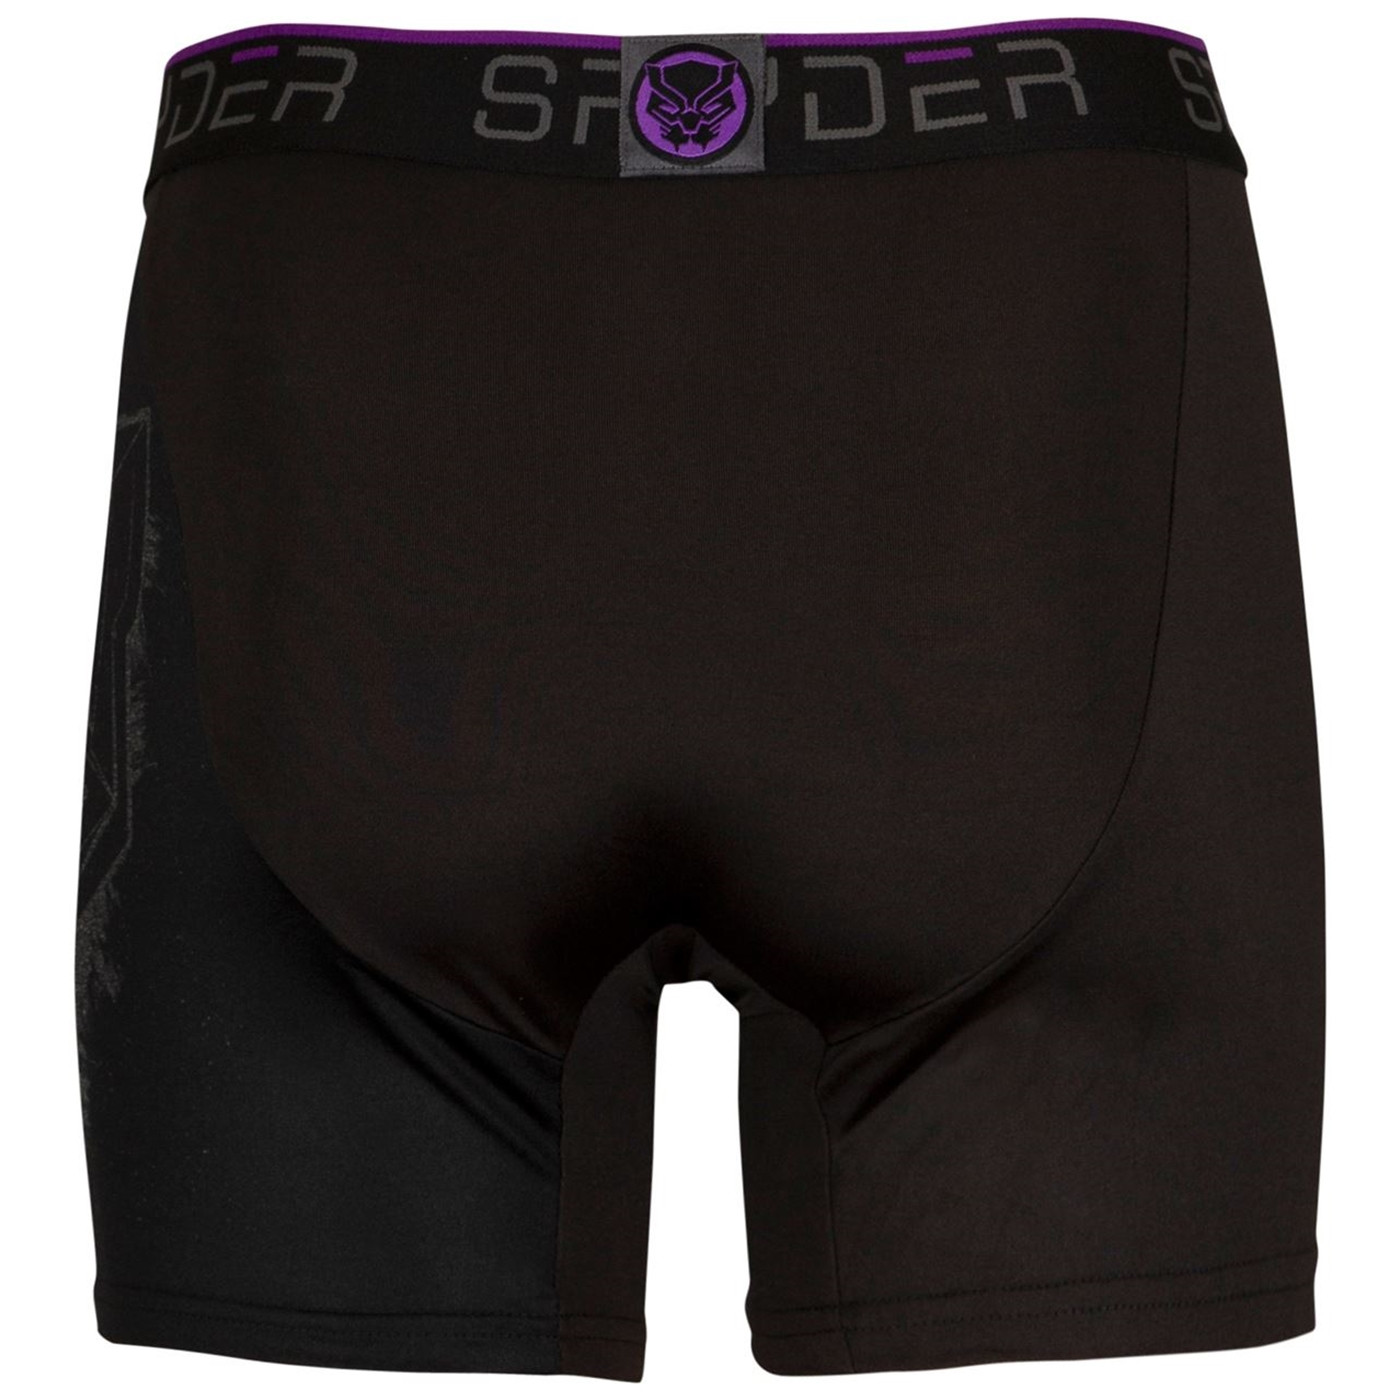 Black Panther Spyder Performance Sports Boxer Briefs 3-Pair Pack